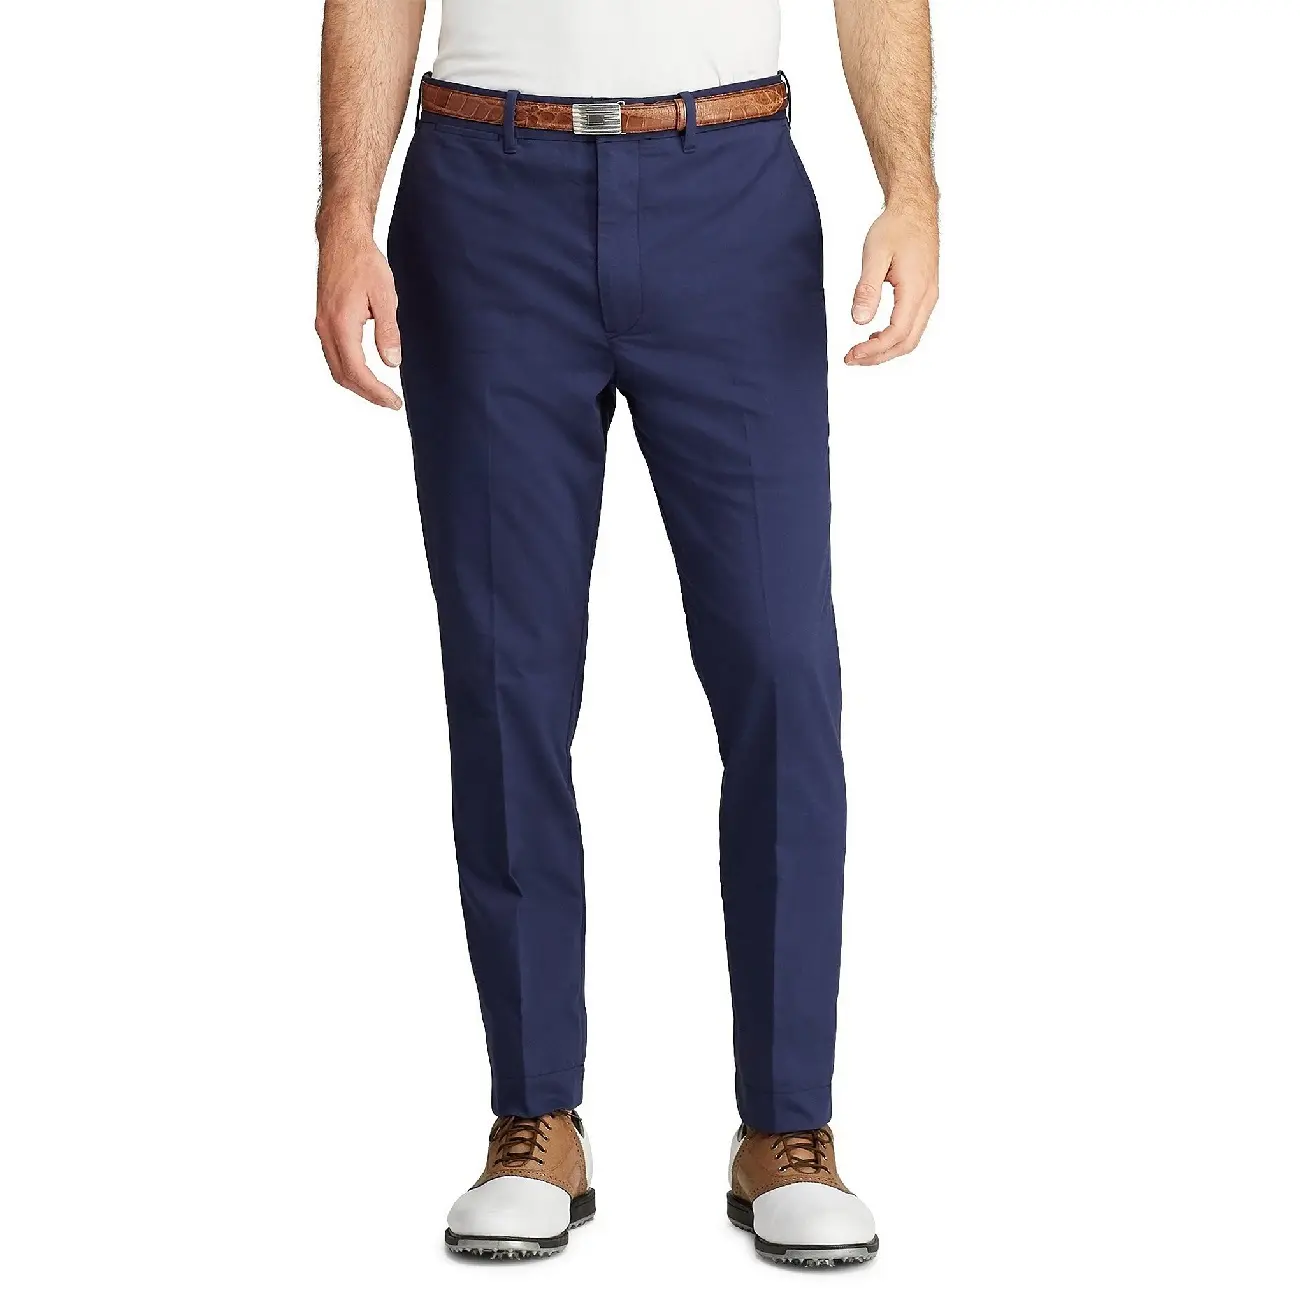 Cotton Business Formal Pant Man Stretch Chino Men's Pants From Bangladesh